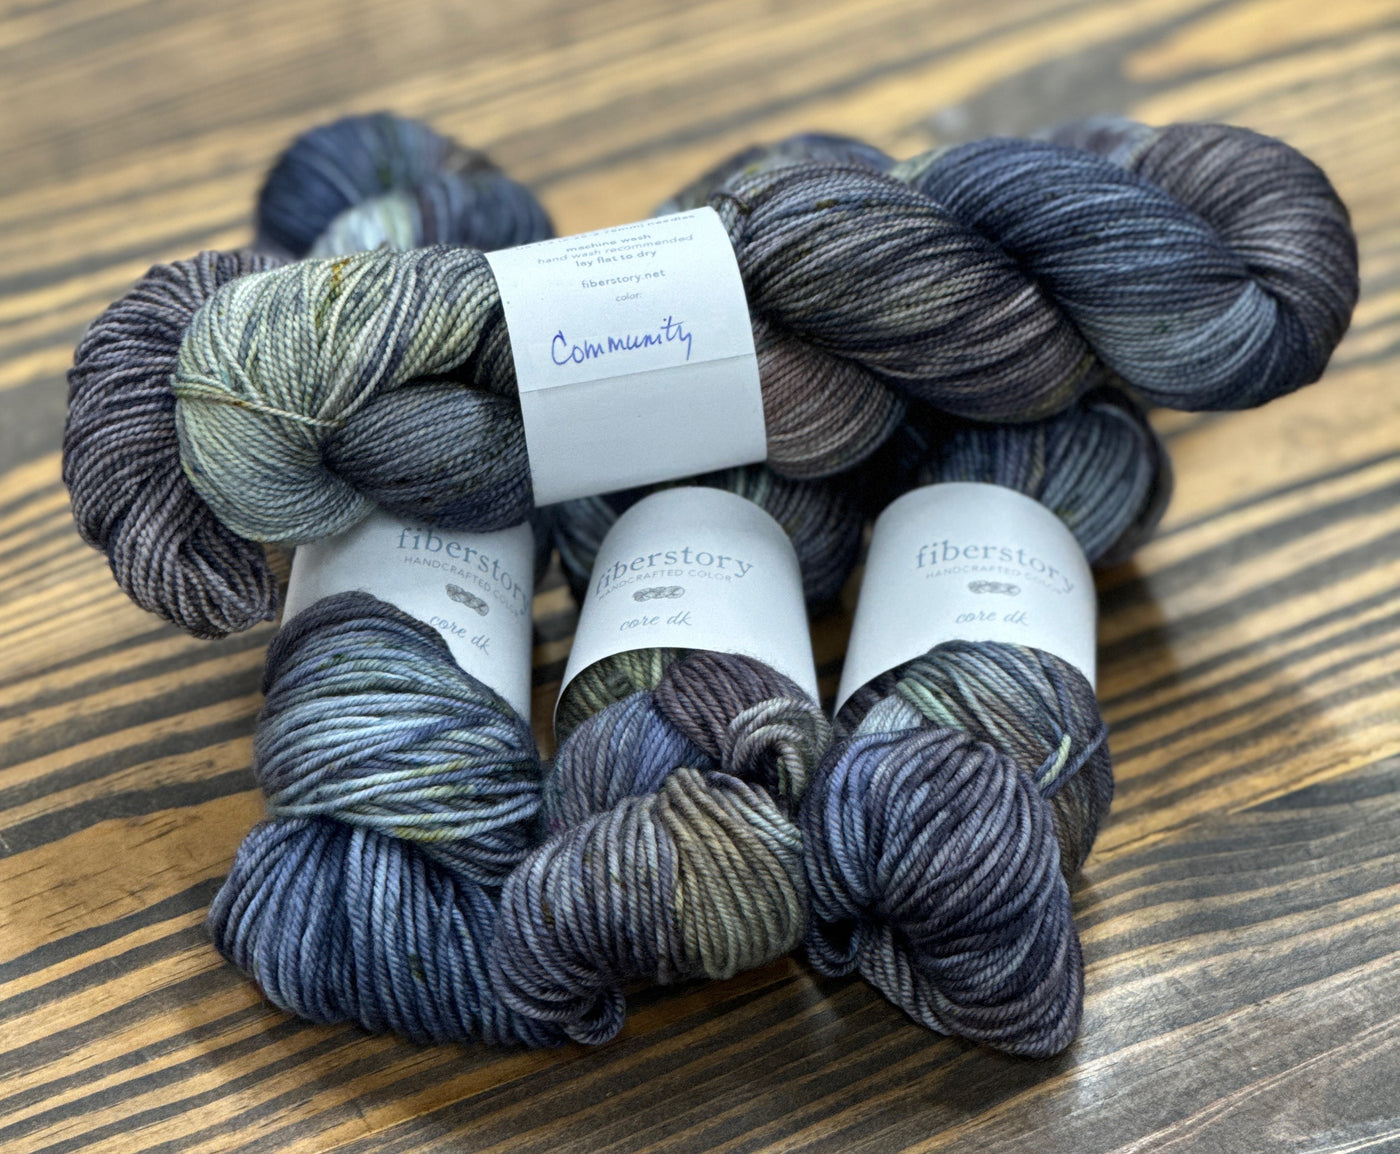 A family-owned local yarn and craft shop in Ann Arbor, Michigan – Spun